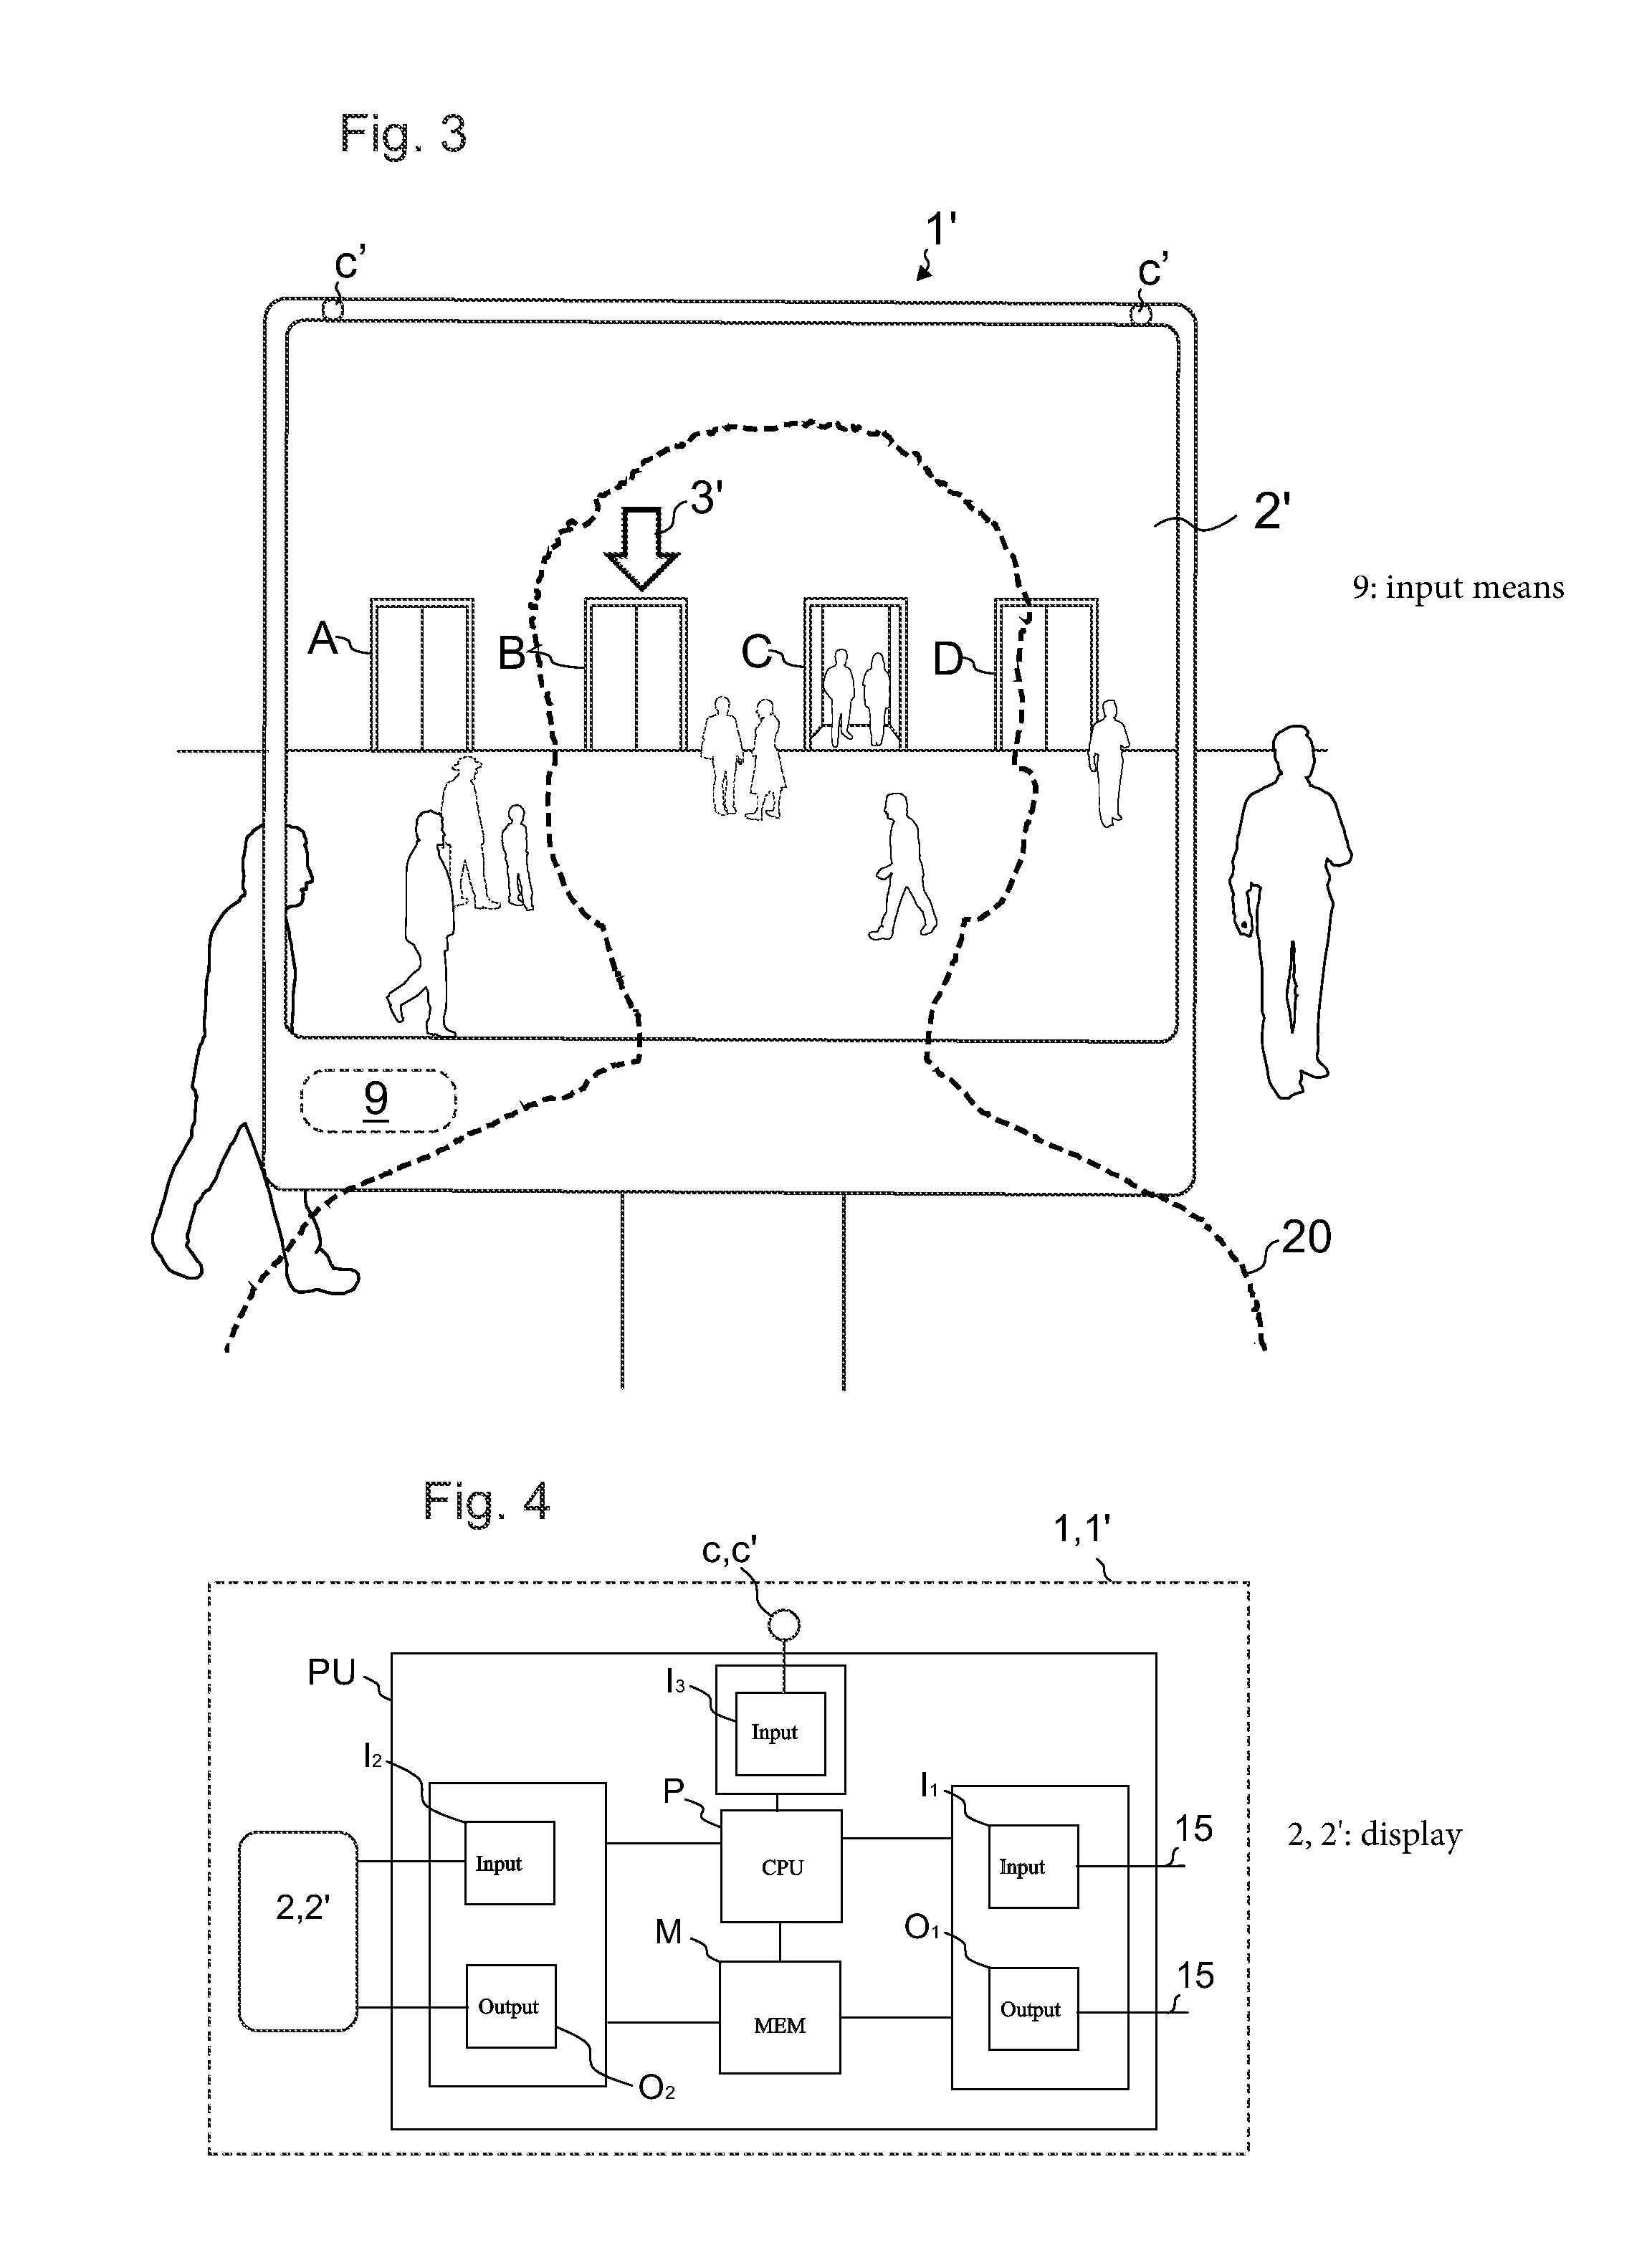 Method for identifying an elevator allocated by an elevator system, arrangement for identifying an elevator allocated by an elevator system and an elevator system